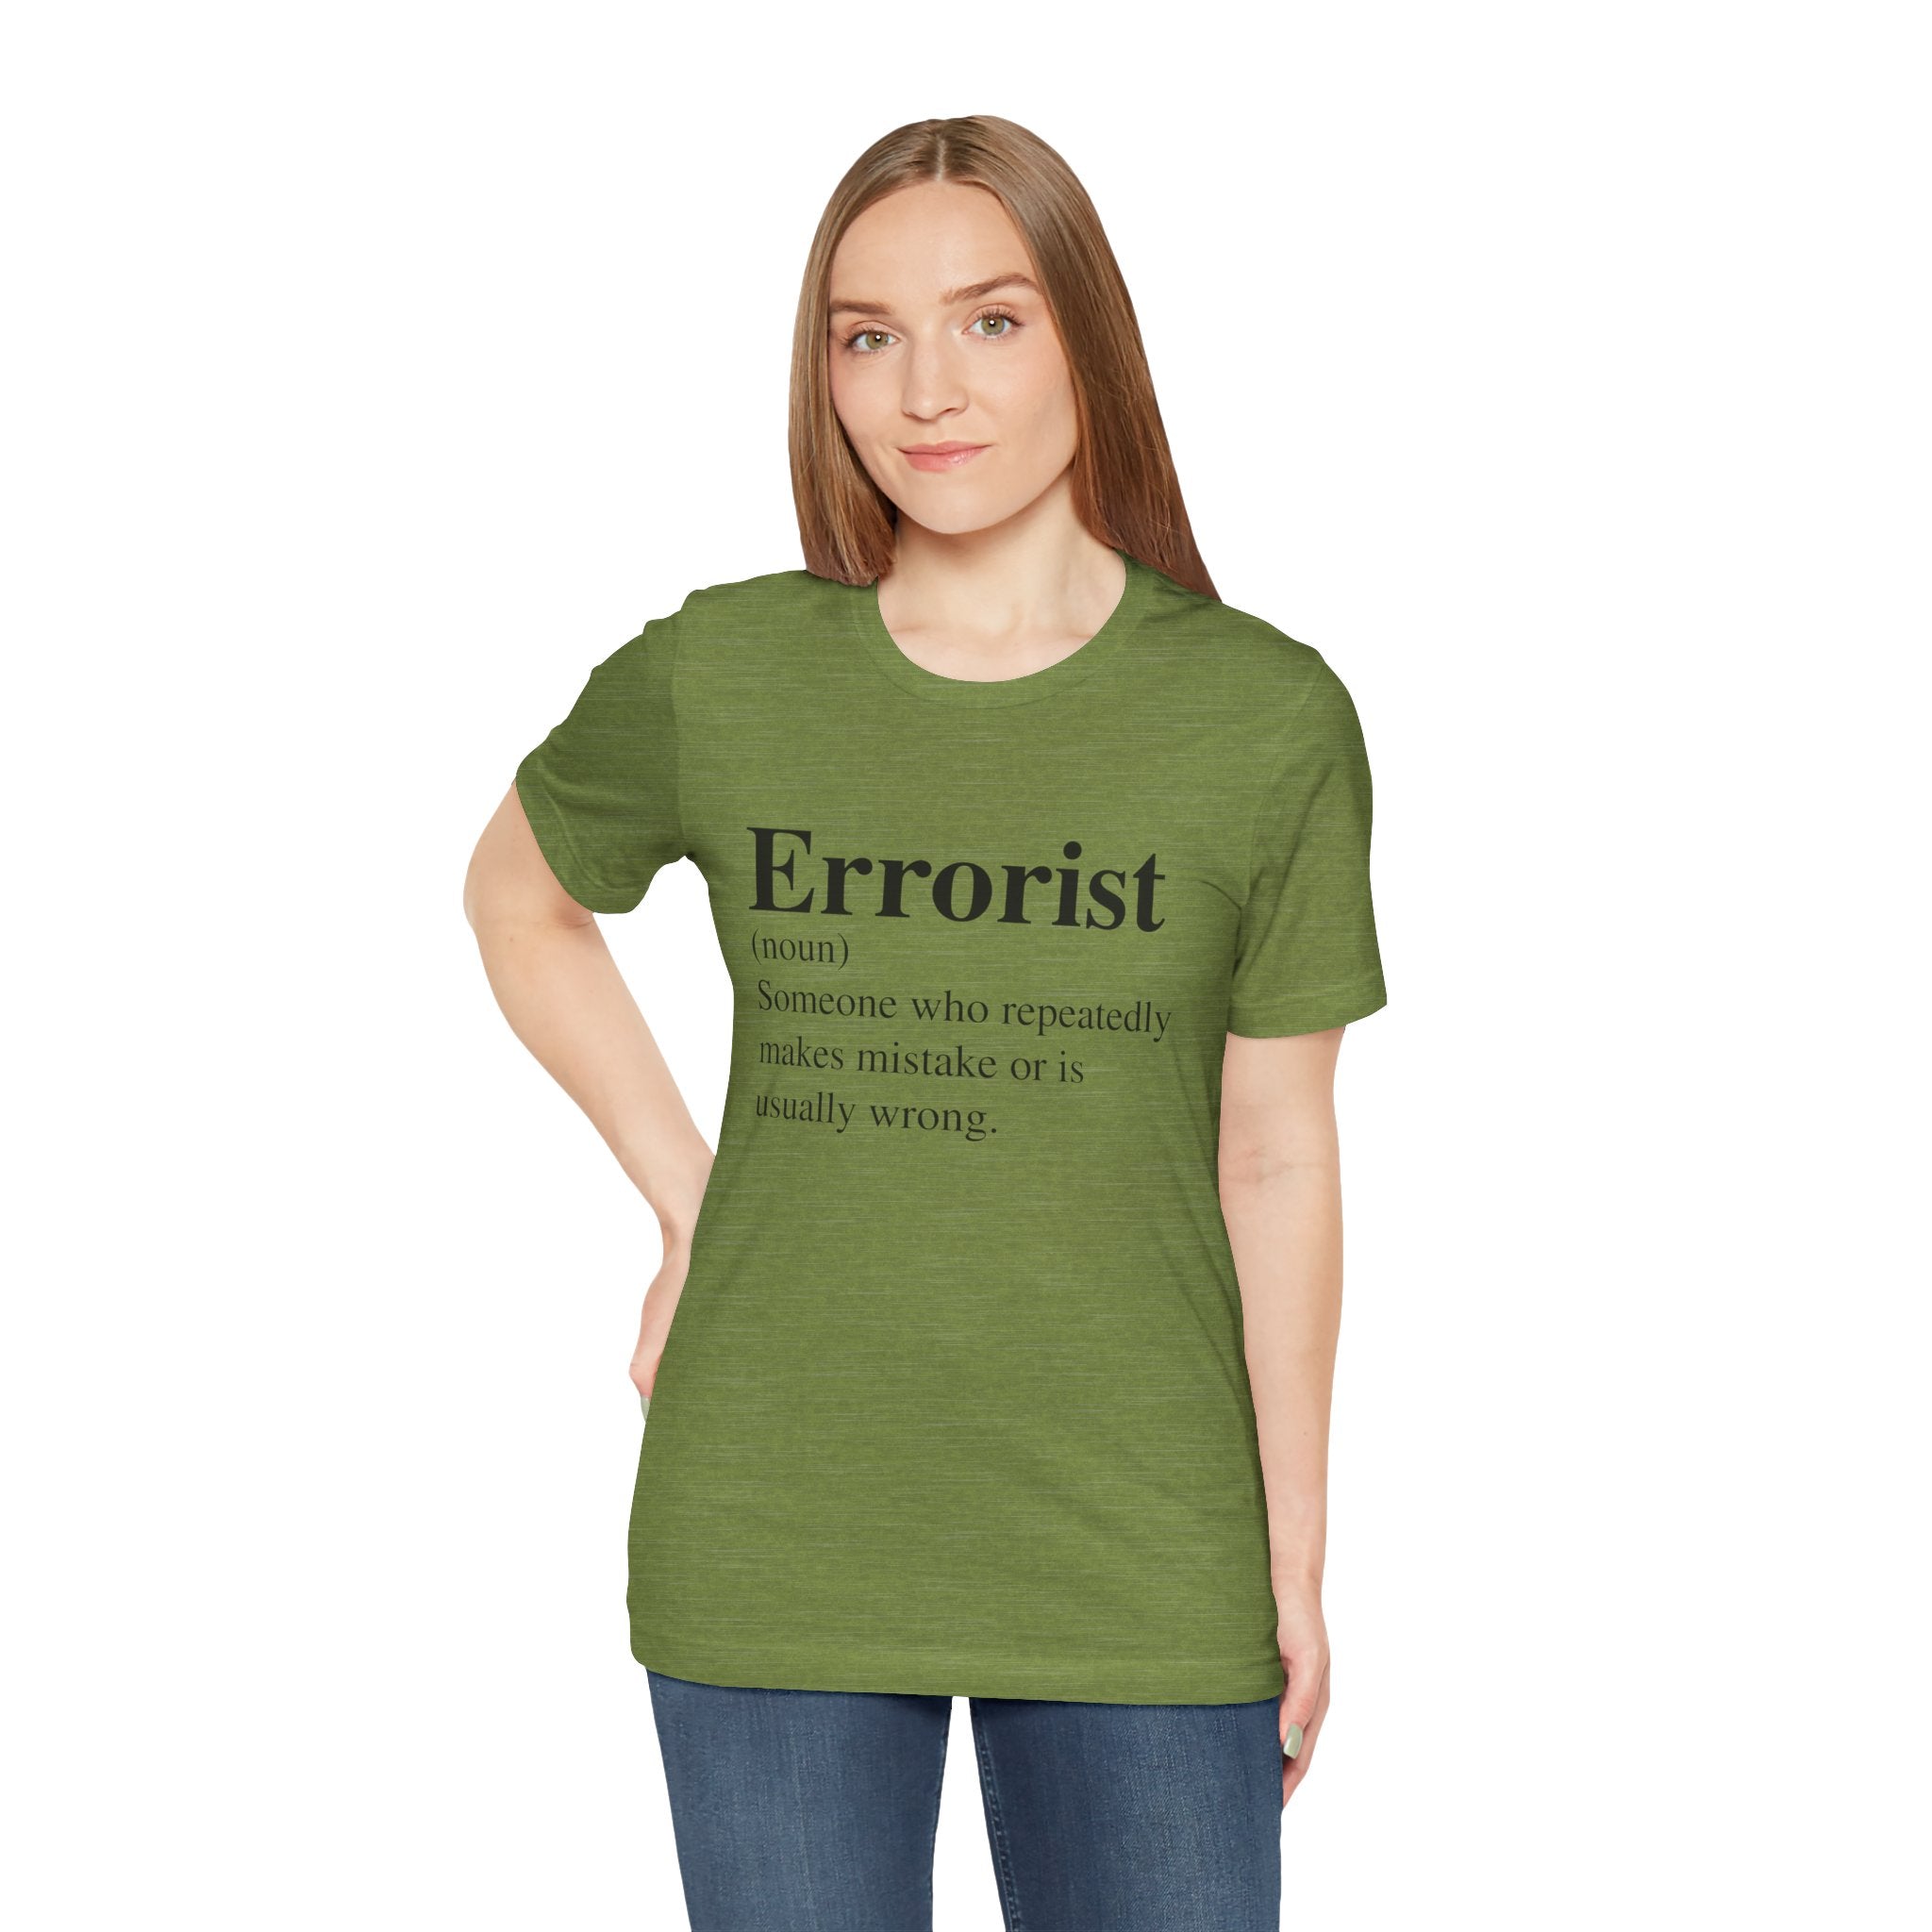 Young woman wearing a soft cotton, green Errorist T-Shirt with the word "Errorist" and its humorous definition printed on it.